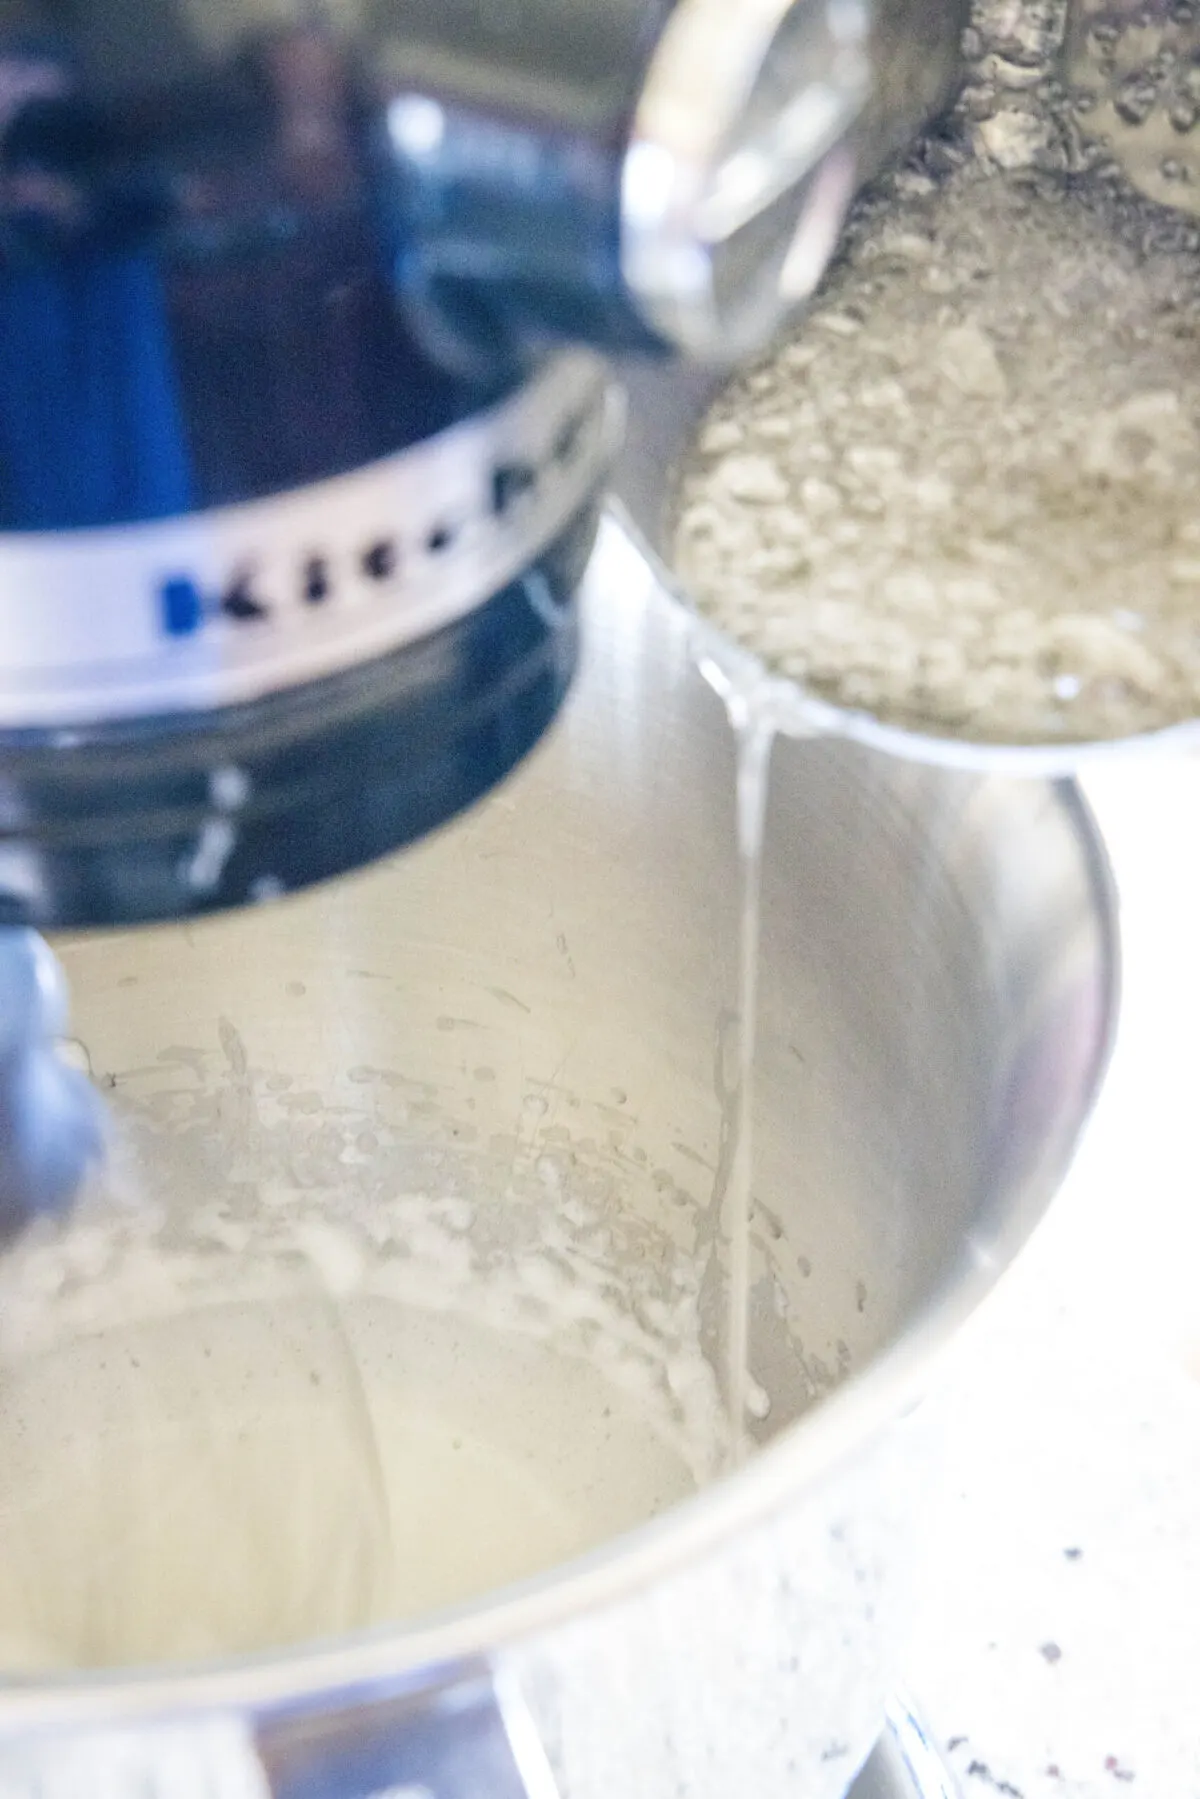 Boiling sugar being poured into beat egg whites in a stand mixer